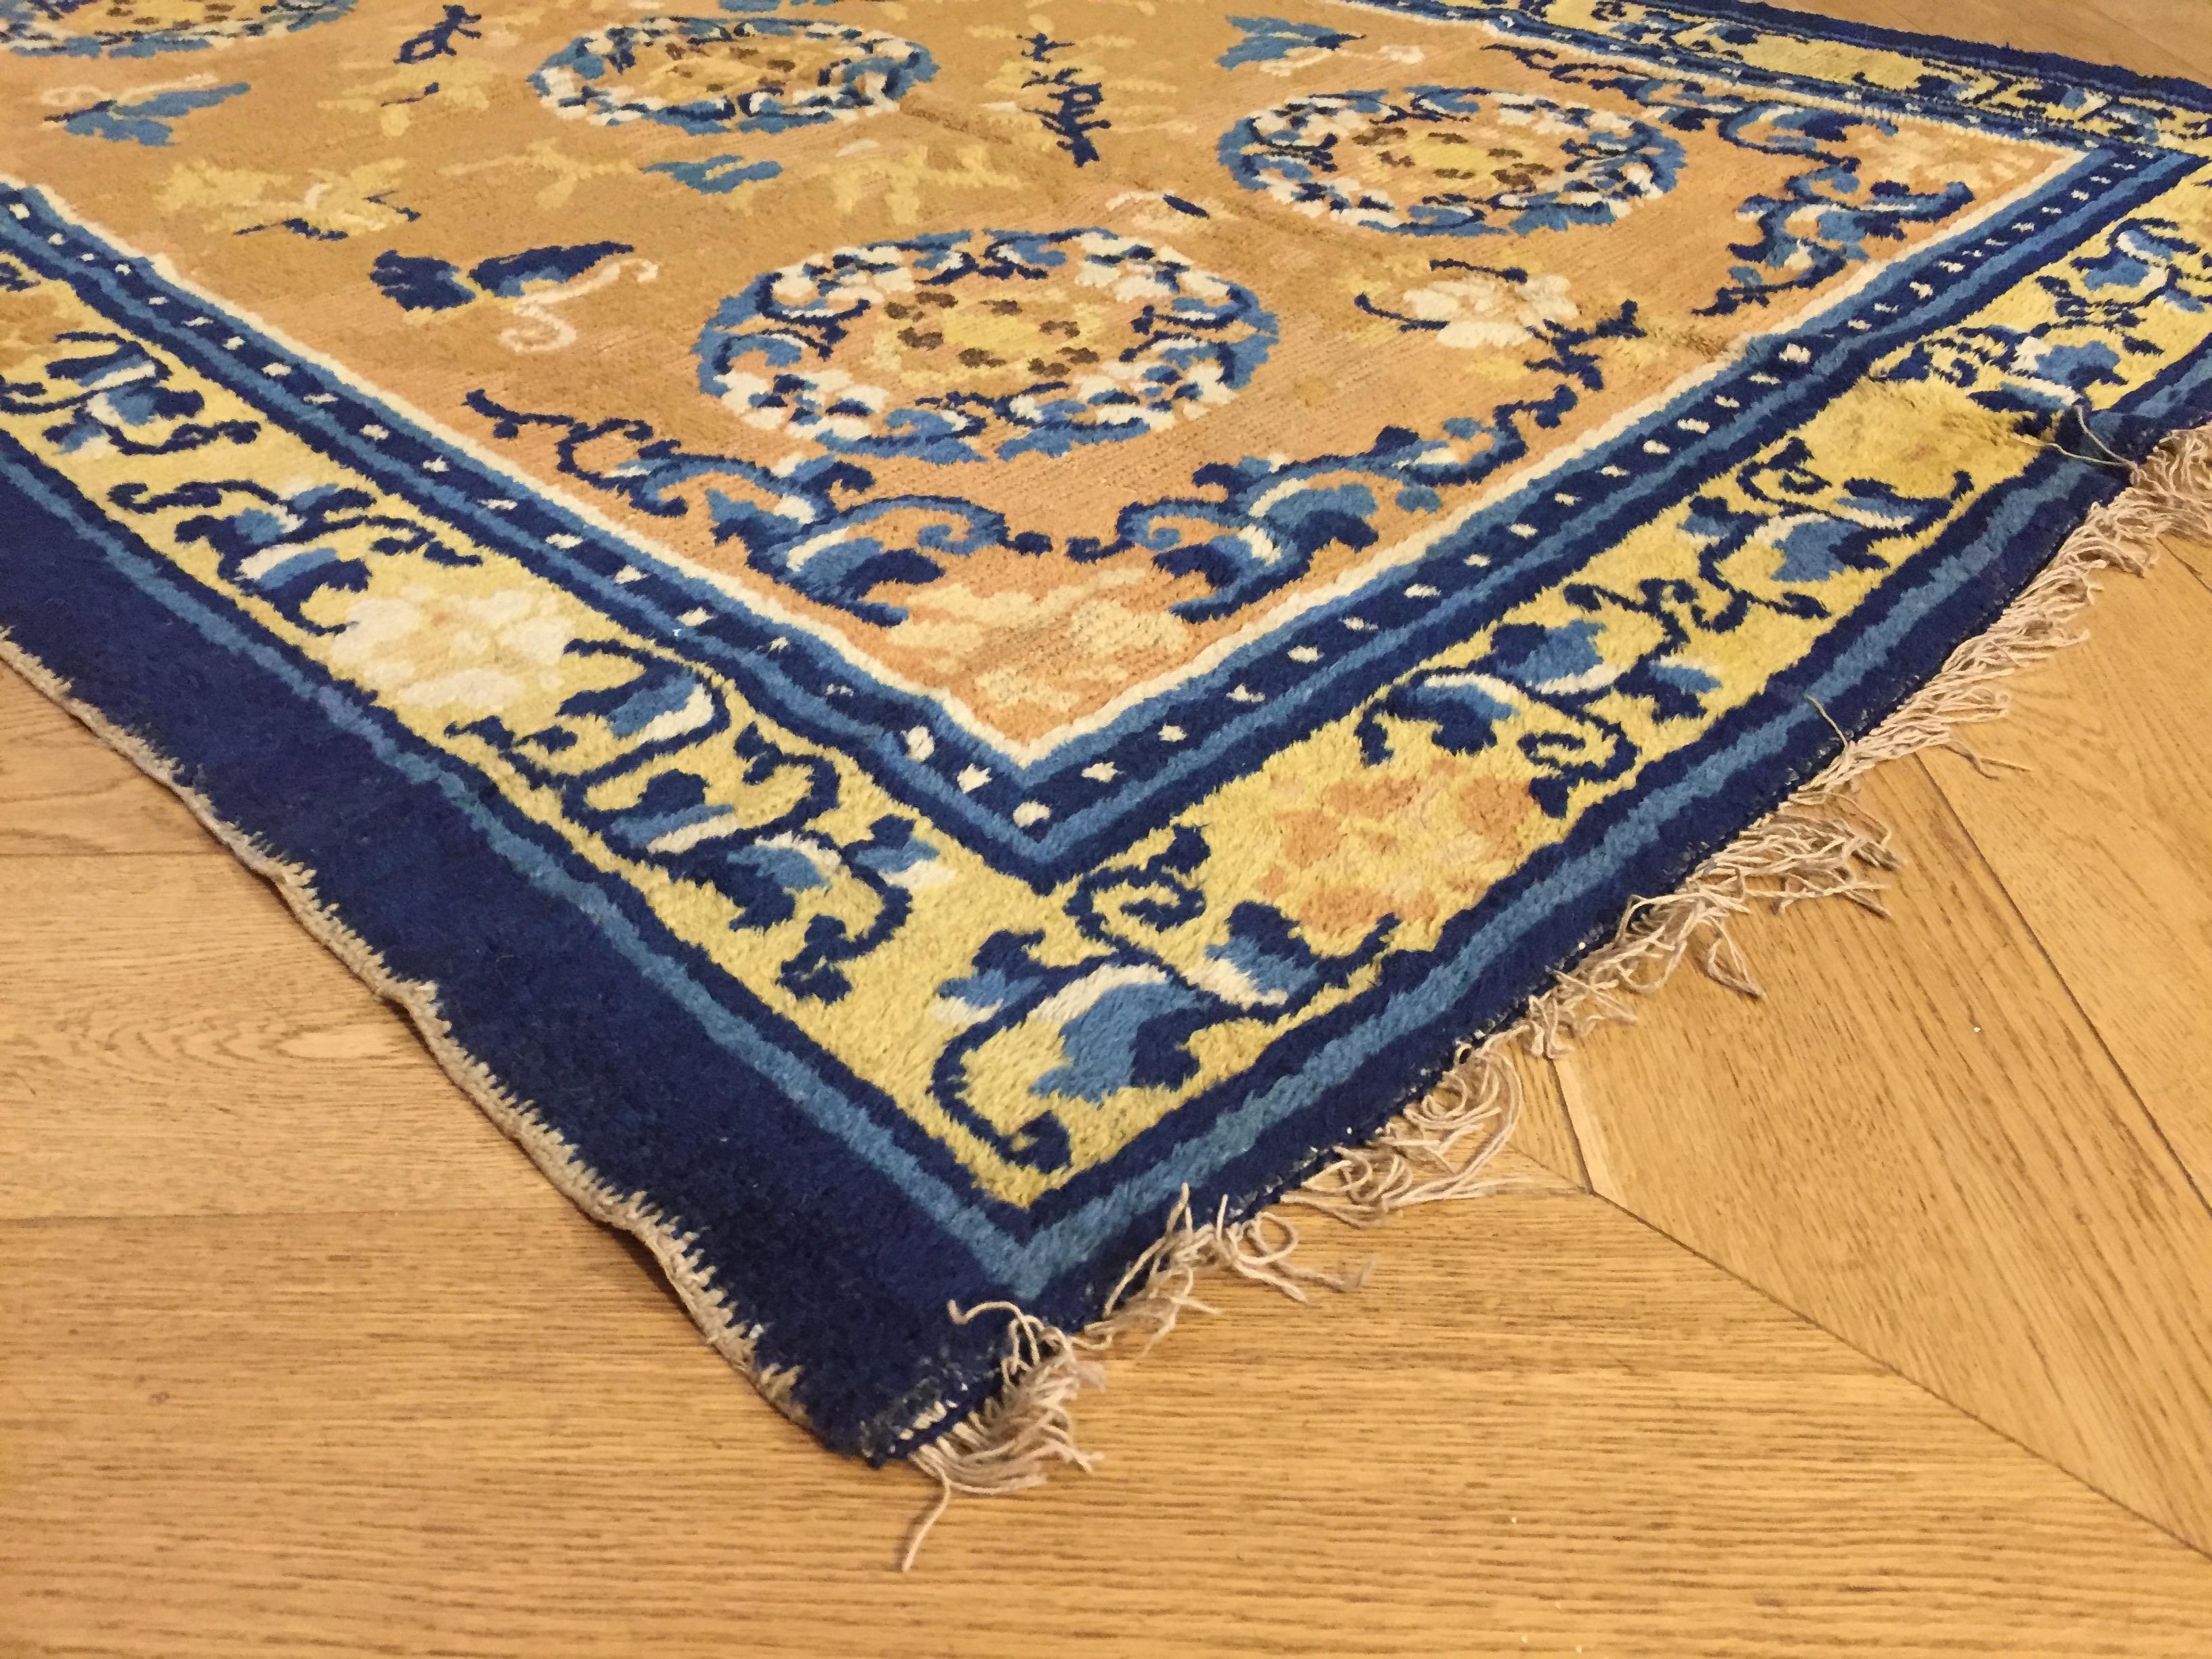 19th Century Chinese Ninxia Ocher Yellow Rug Fine Hand Knotted, Cotton and Wool For Sale 7